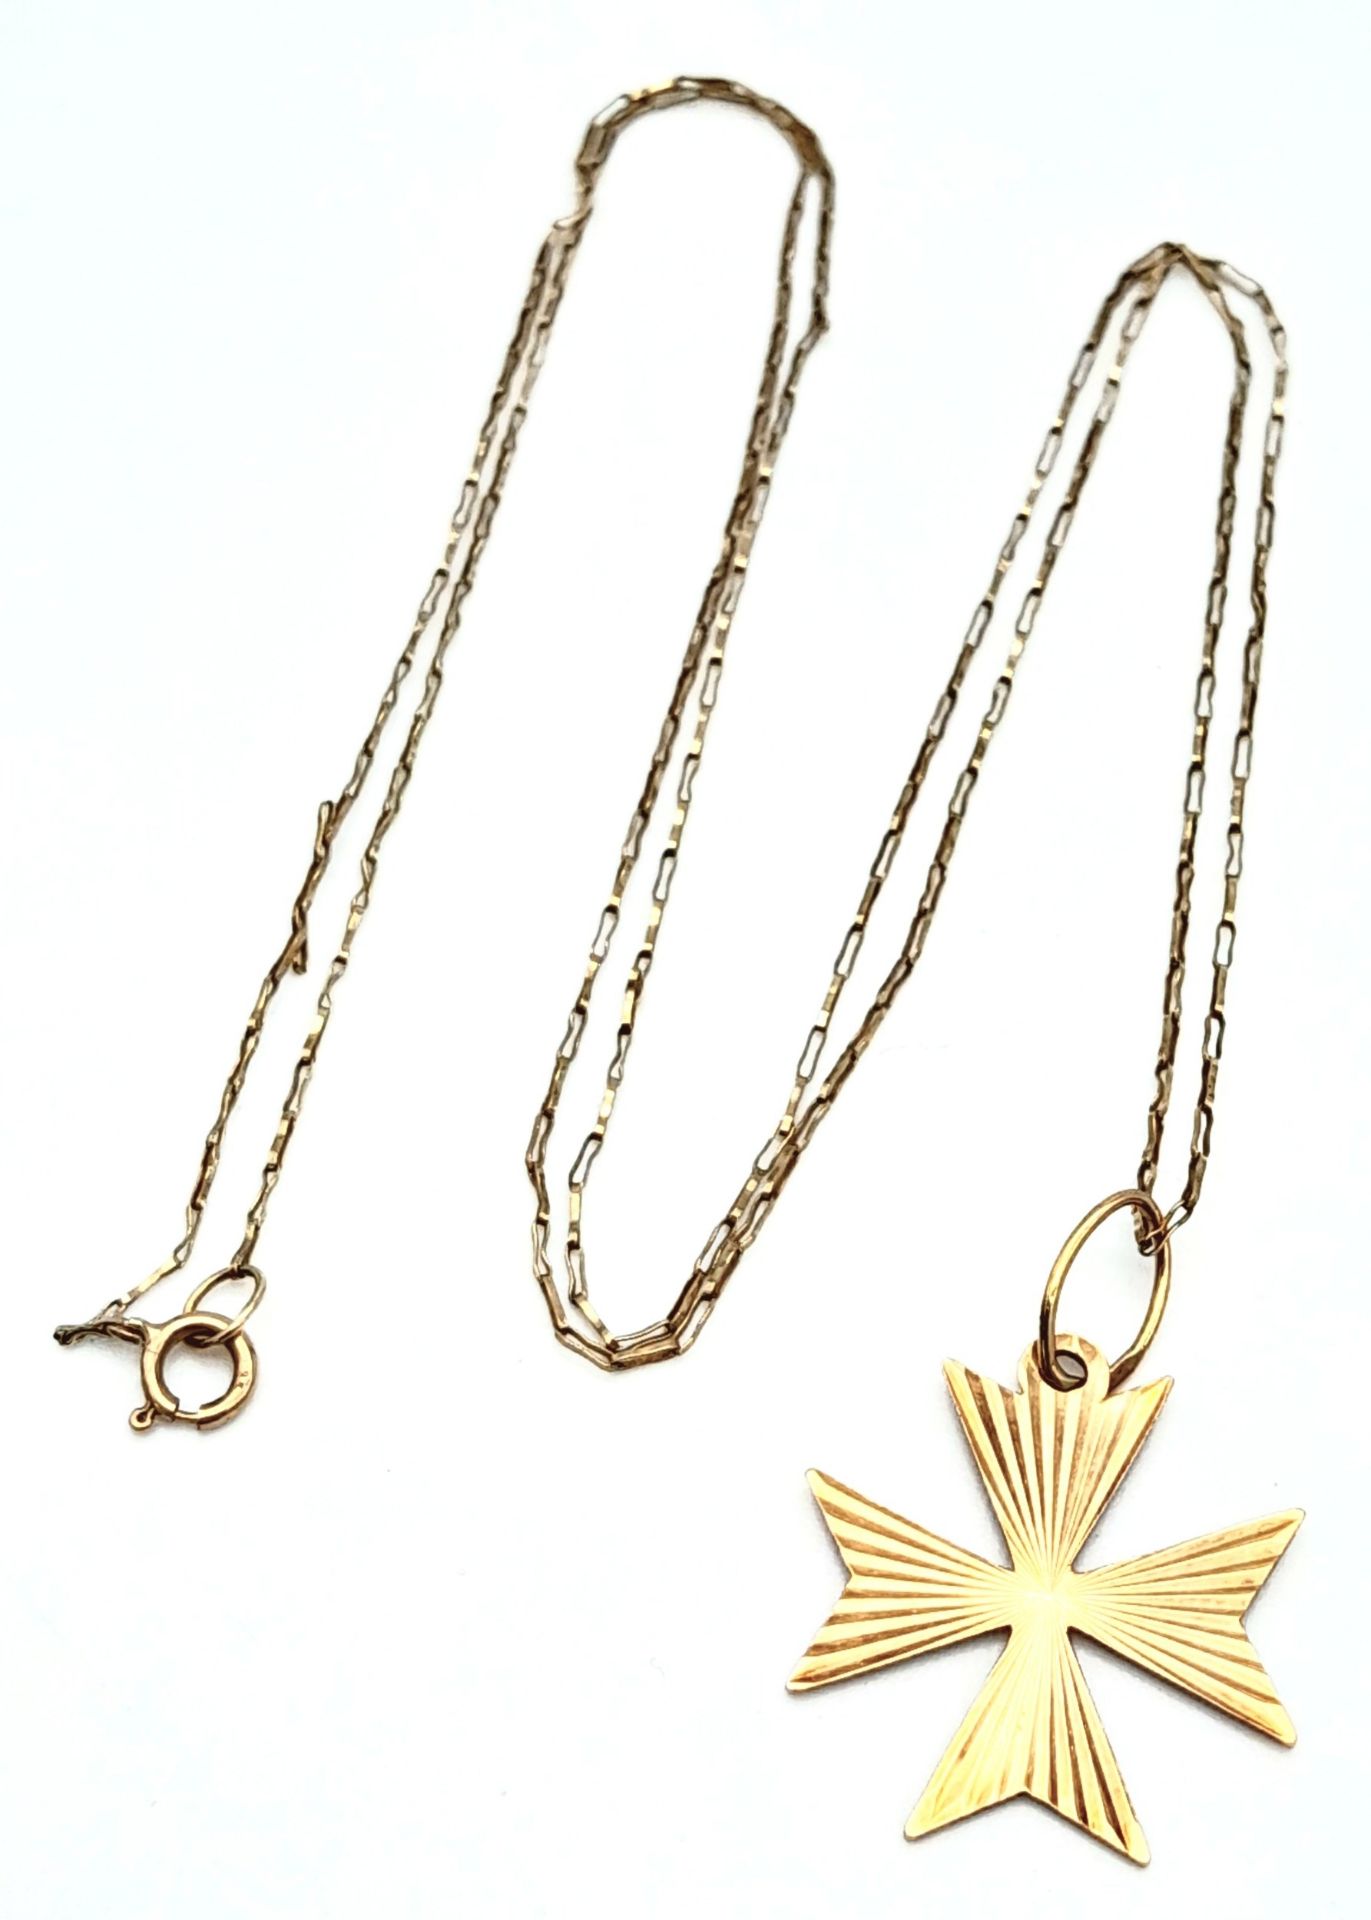 9 K yellow gold chain necklace with a Maltese cross pendant (12 x 12 mm), chain length: 51 cm, total - Bild 3 aus 5